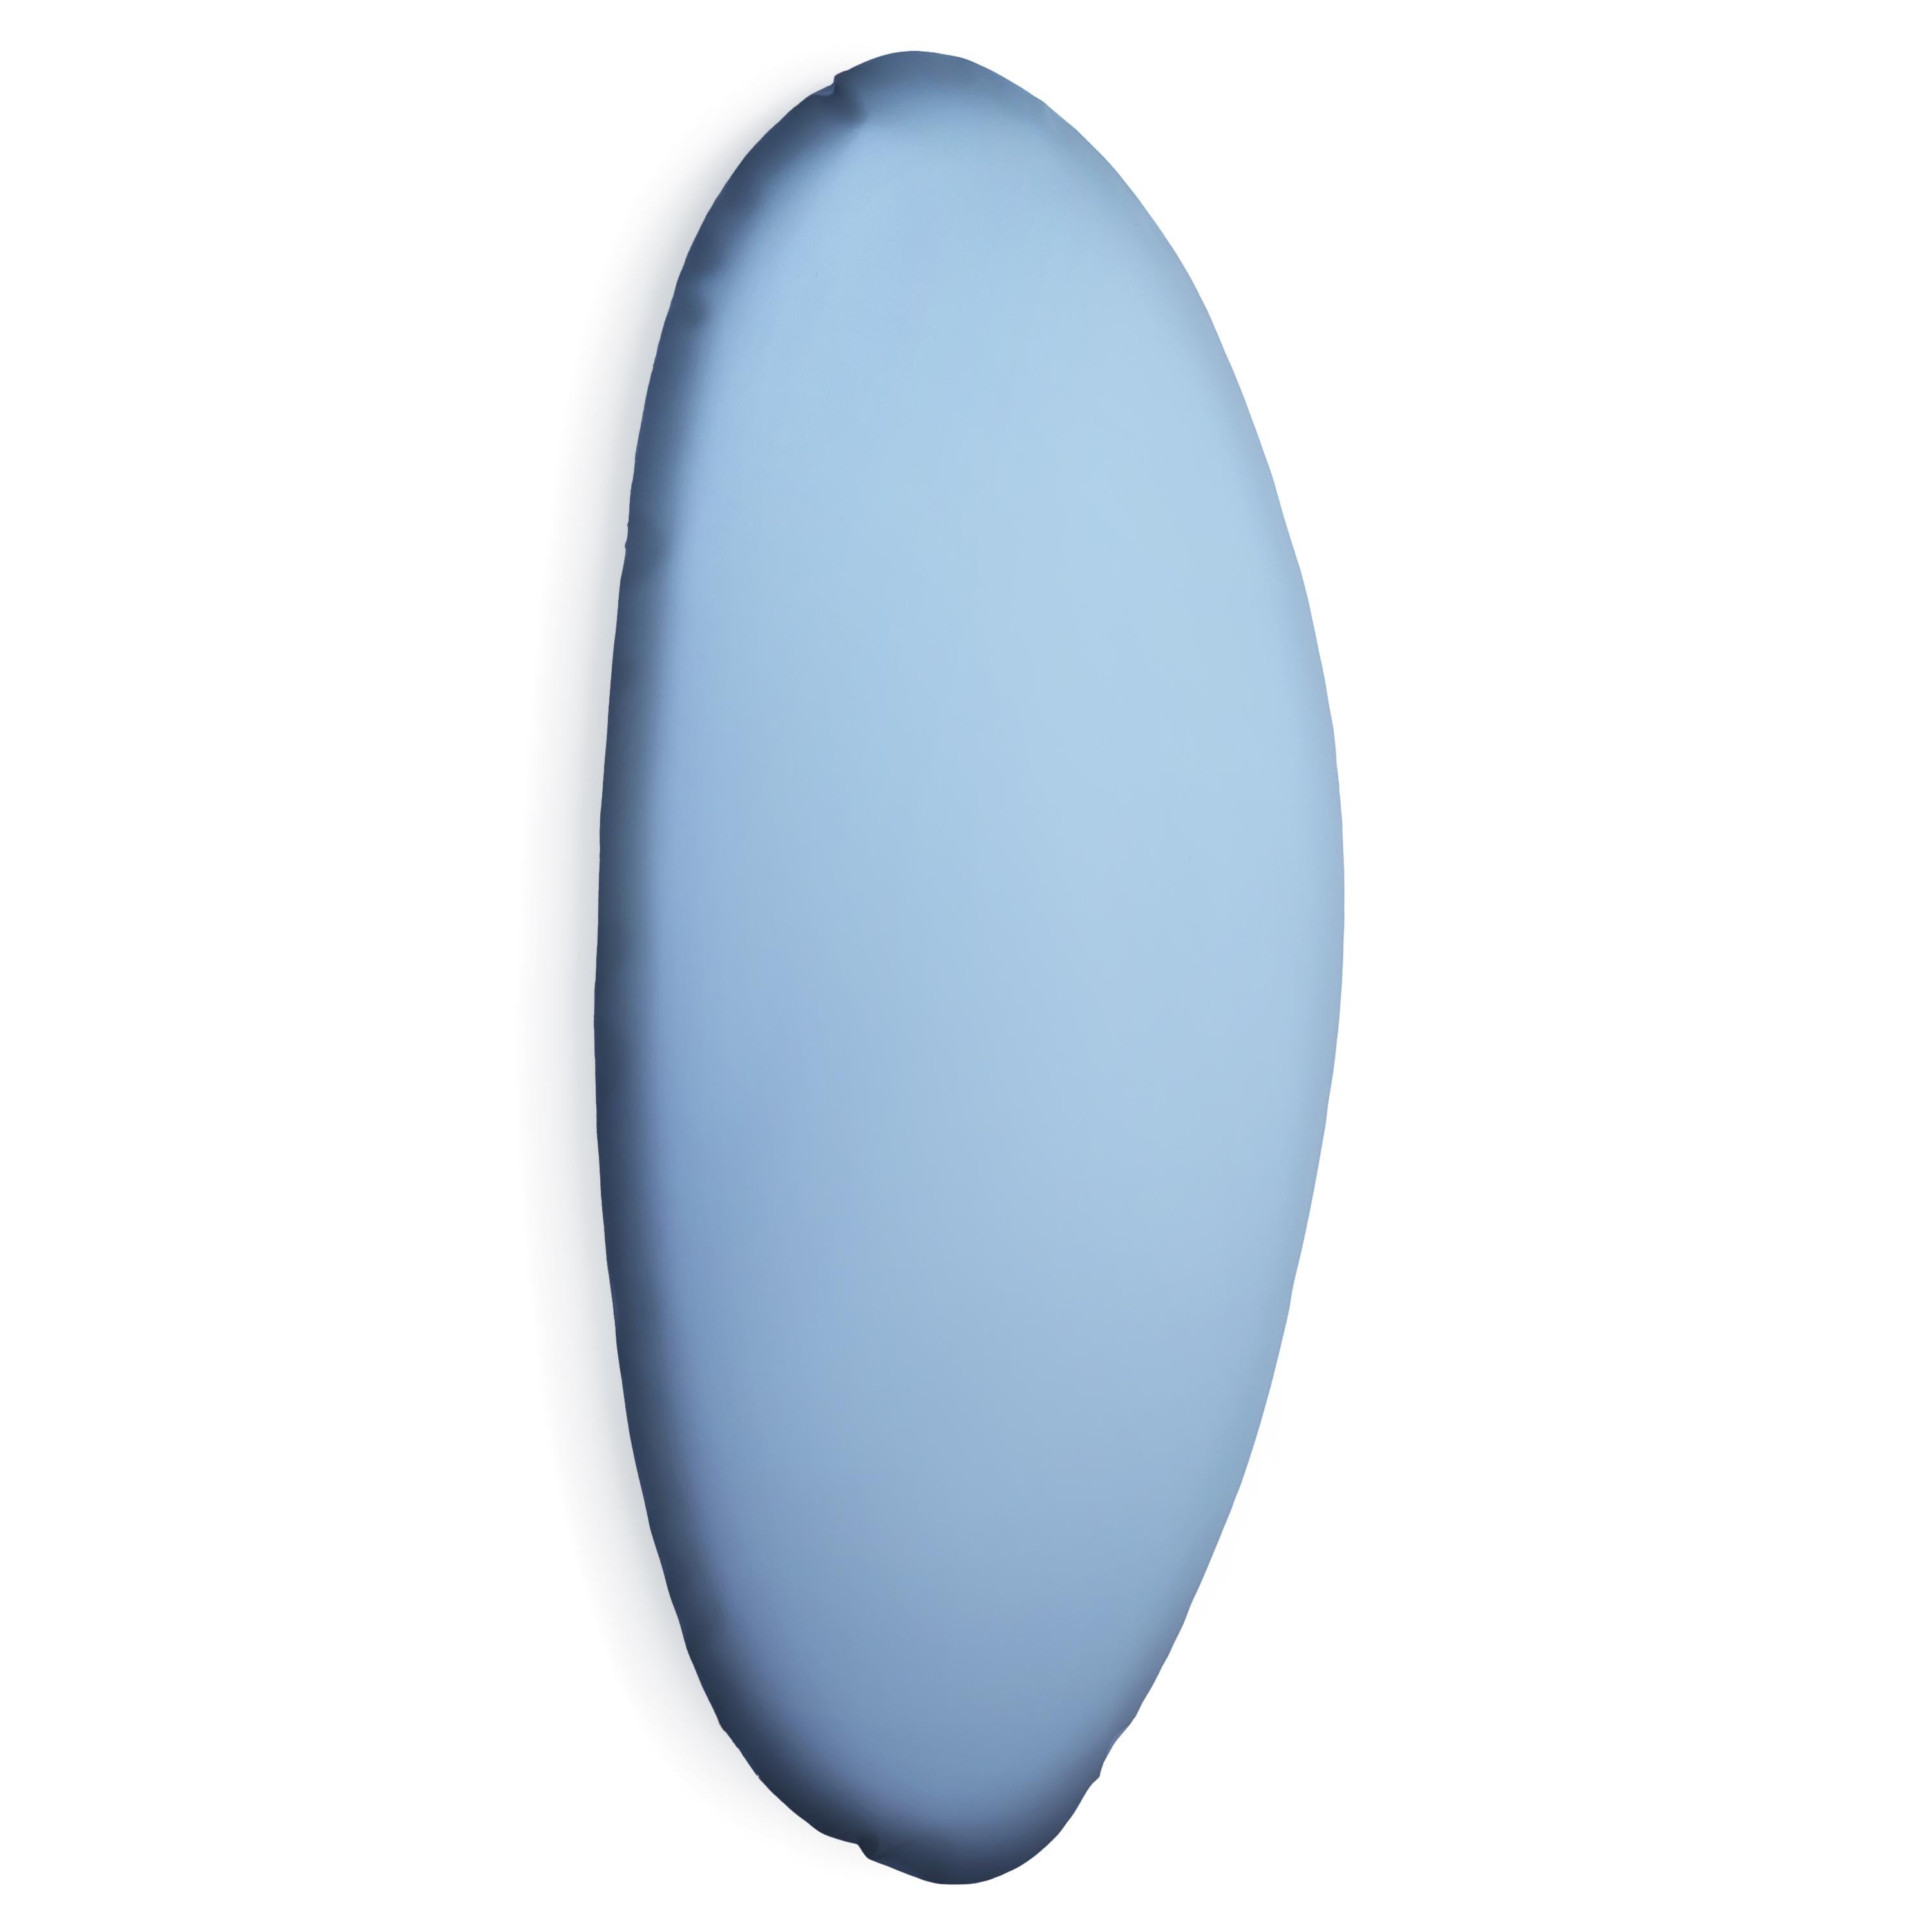 Polish Contemporary Blue Wall Sculpture 'Tafla O4', Cotton Candy Collection by Zieta For Sale